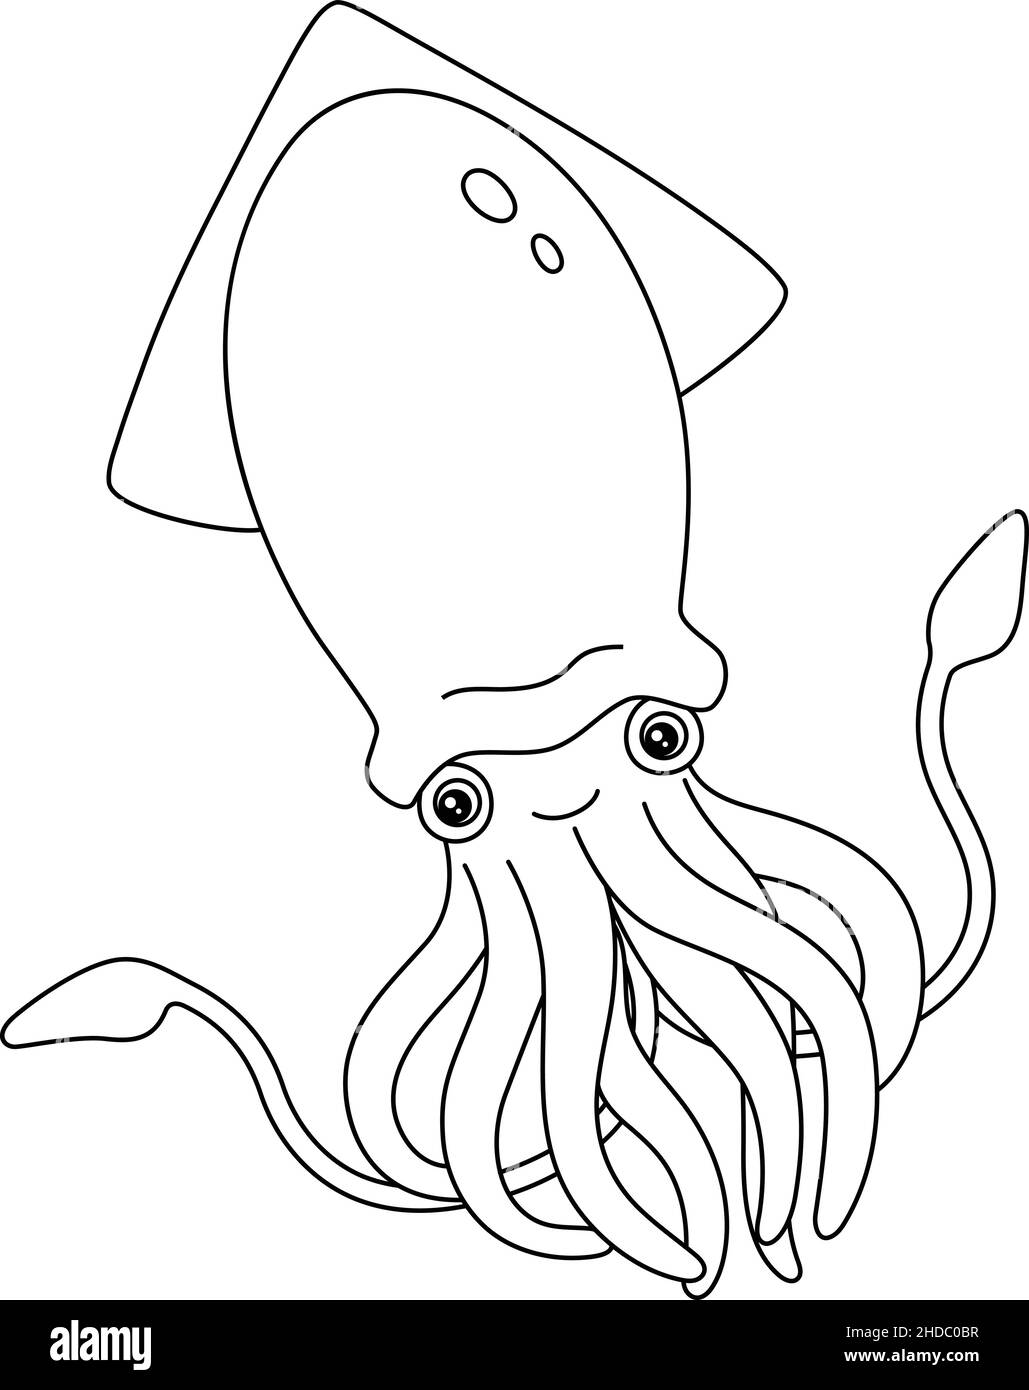 Giant Squid Coloring Page Isolated for Kids Stock Vector